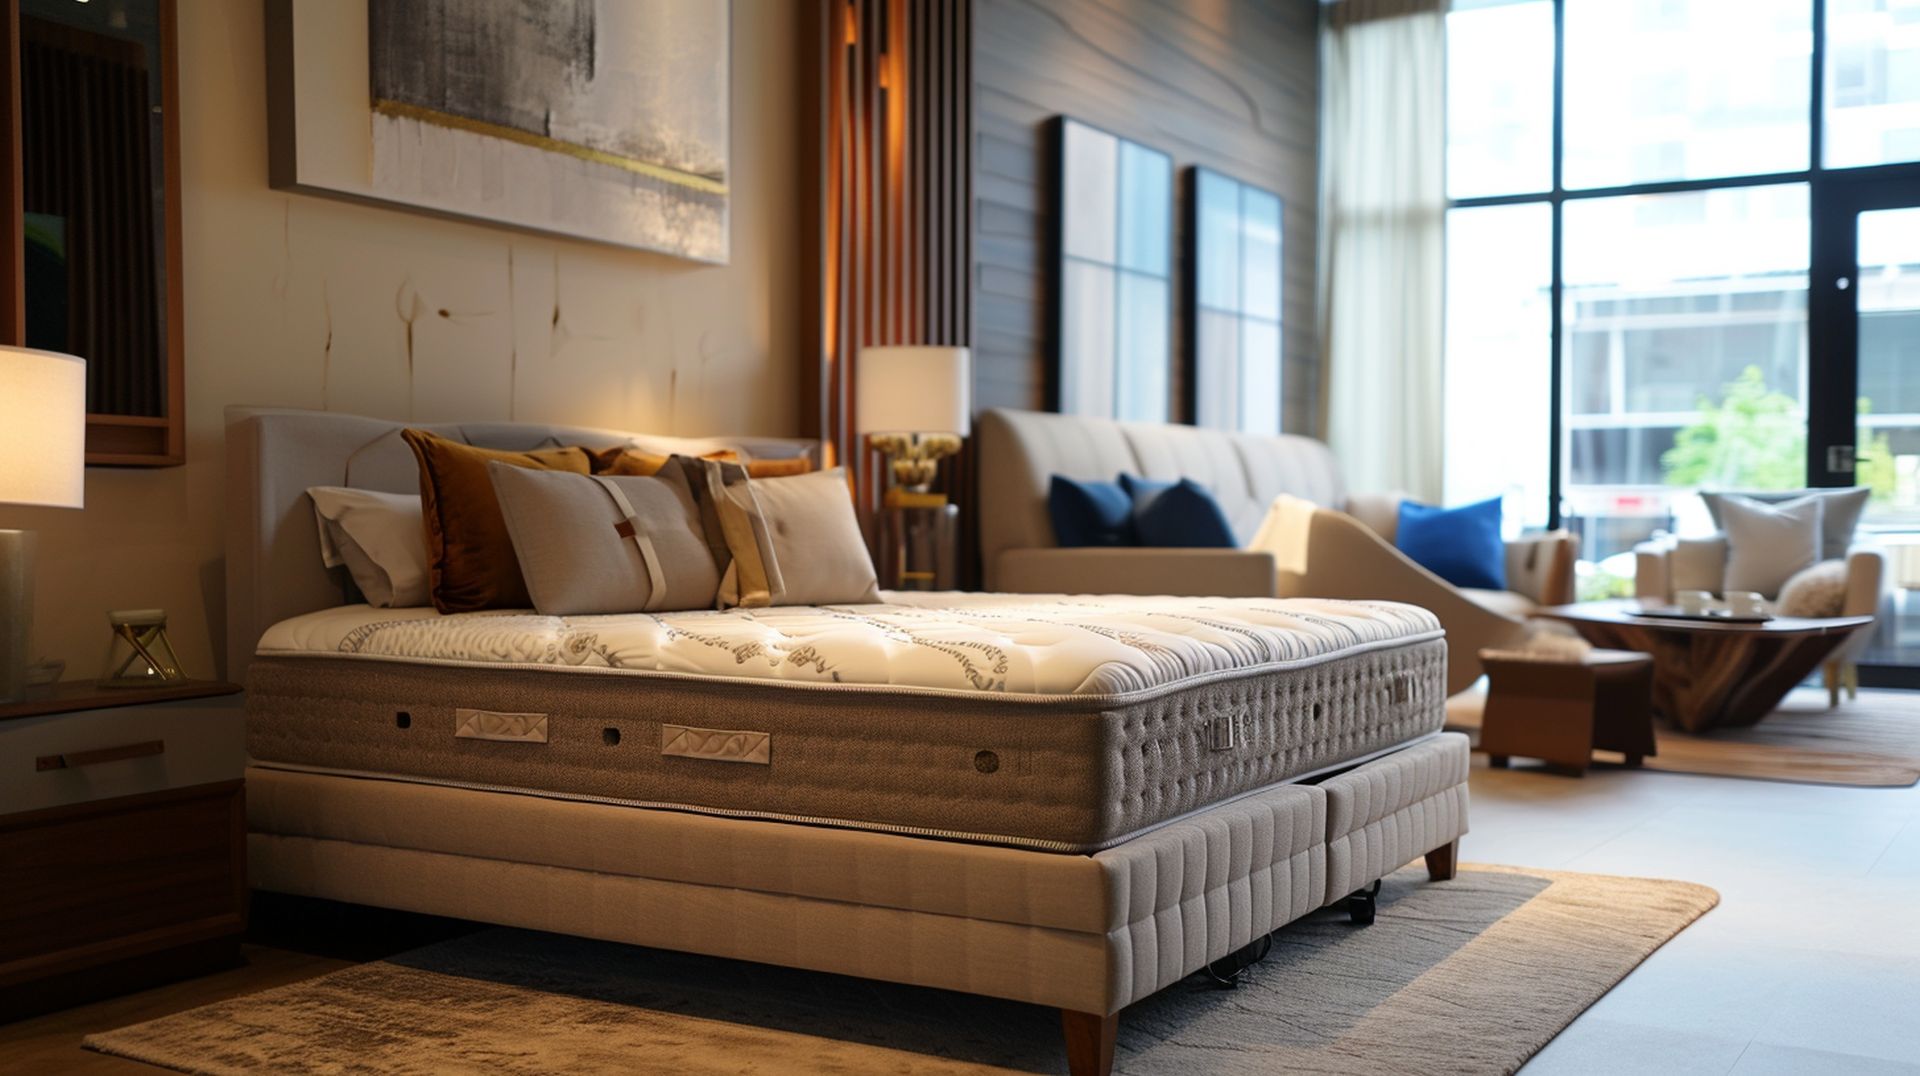 If you're looking for a new bed, mattress stores in New Haven offer the best customer and delivery service, financing, and warranties in Connecticut